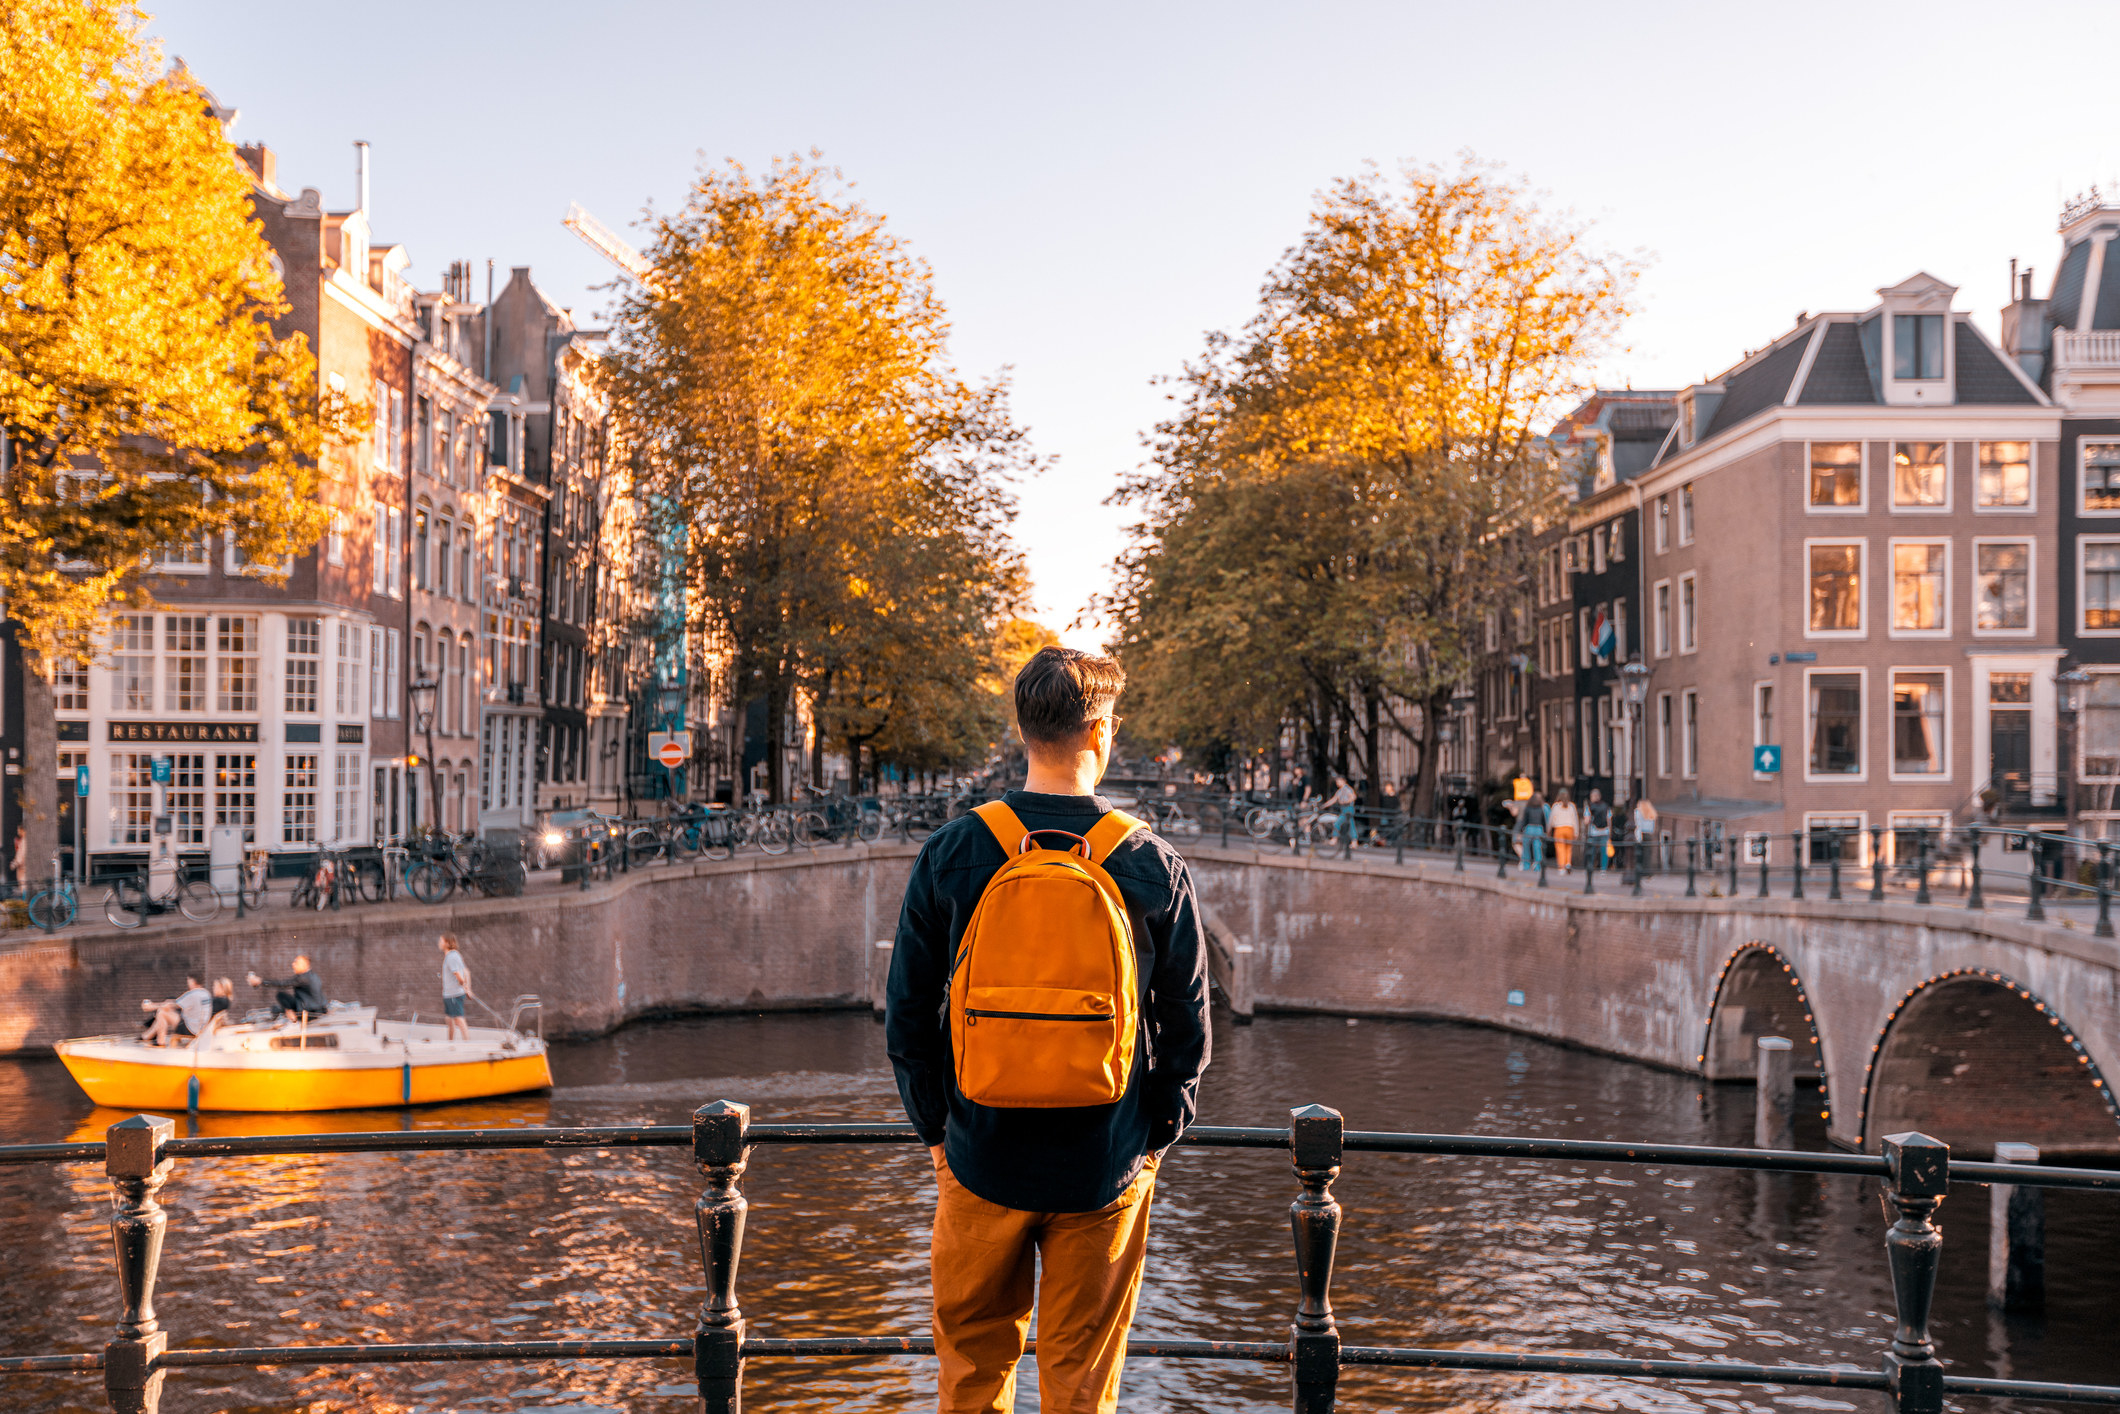 Rear view of a man wearing a backpack and looking at an Amsterdam canal on a sunny day